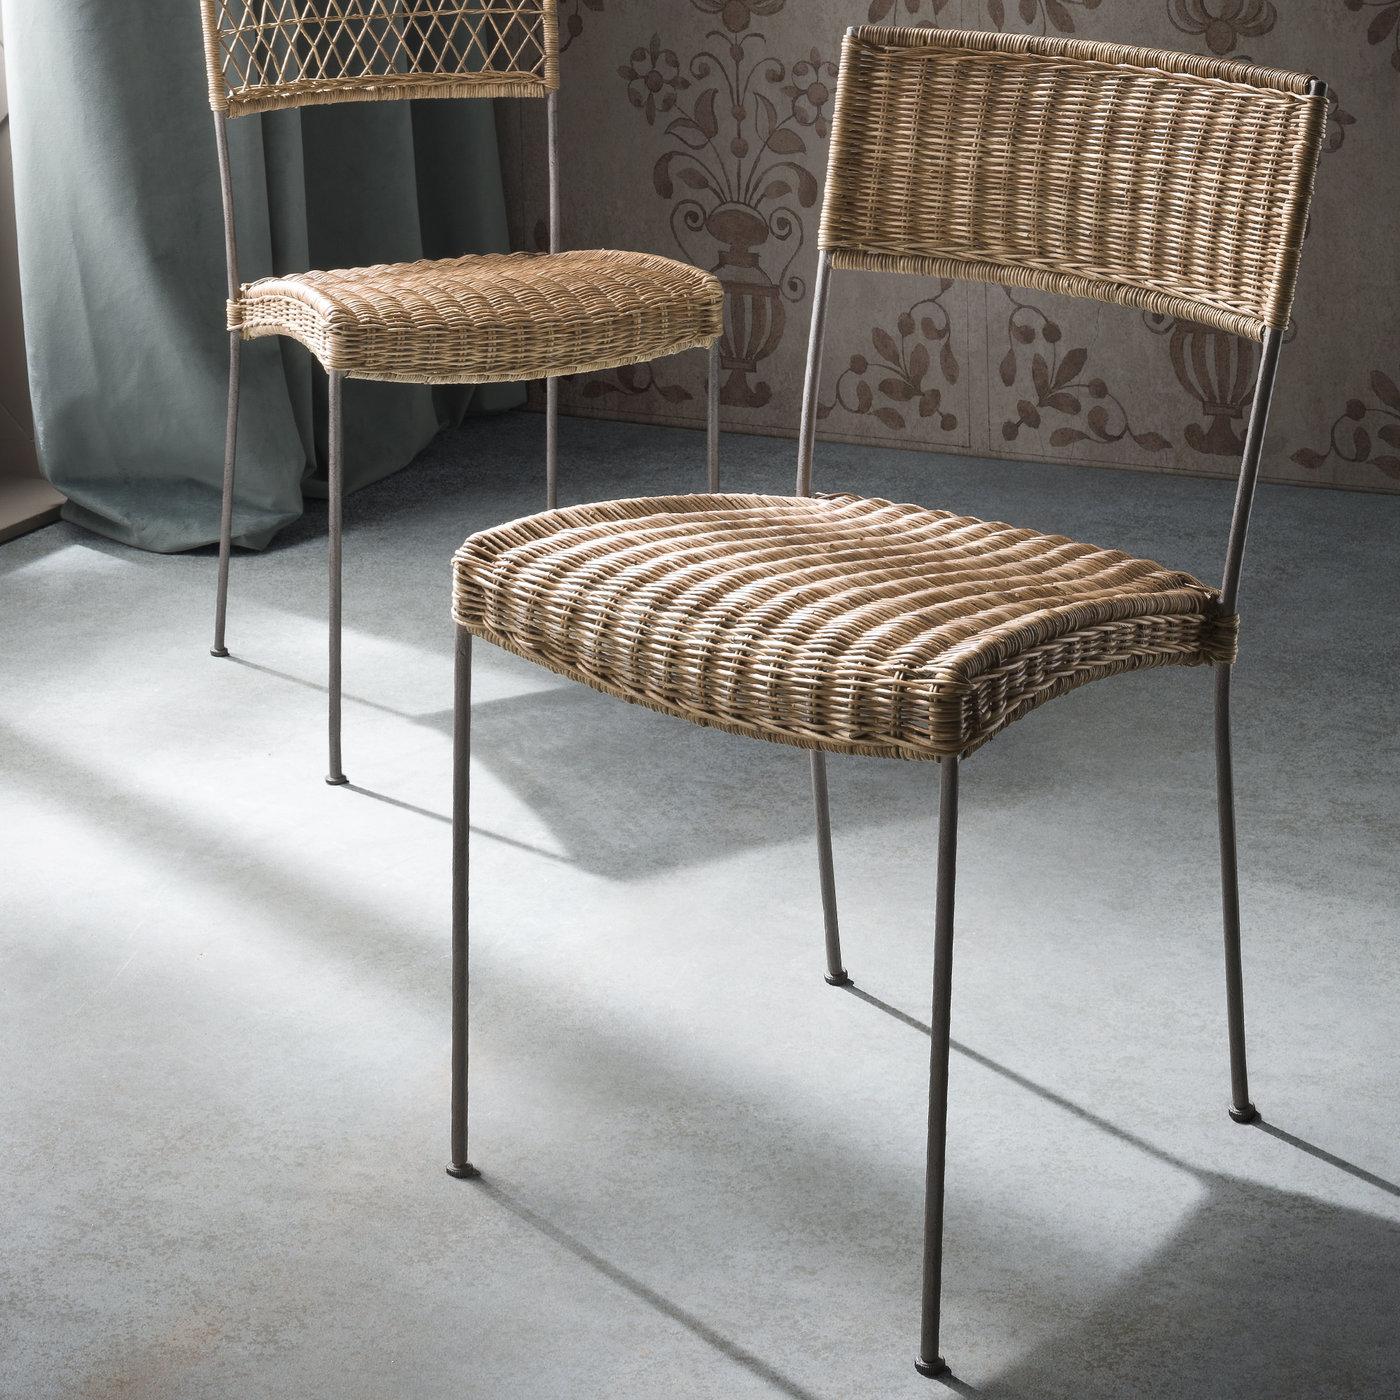 Evoking the image of a French terrace or a patio in Tuscany, this set of chairs has a classic design reinterpreted with a metal frame and woven bamboo details. Light and versatile, the slim, cylindrical legs support the generous seat, whose curves